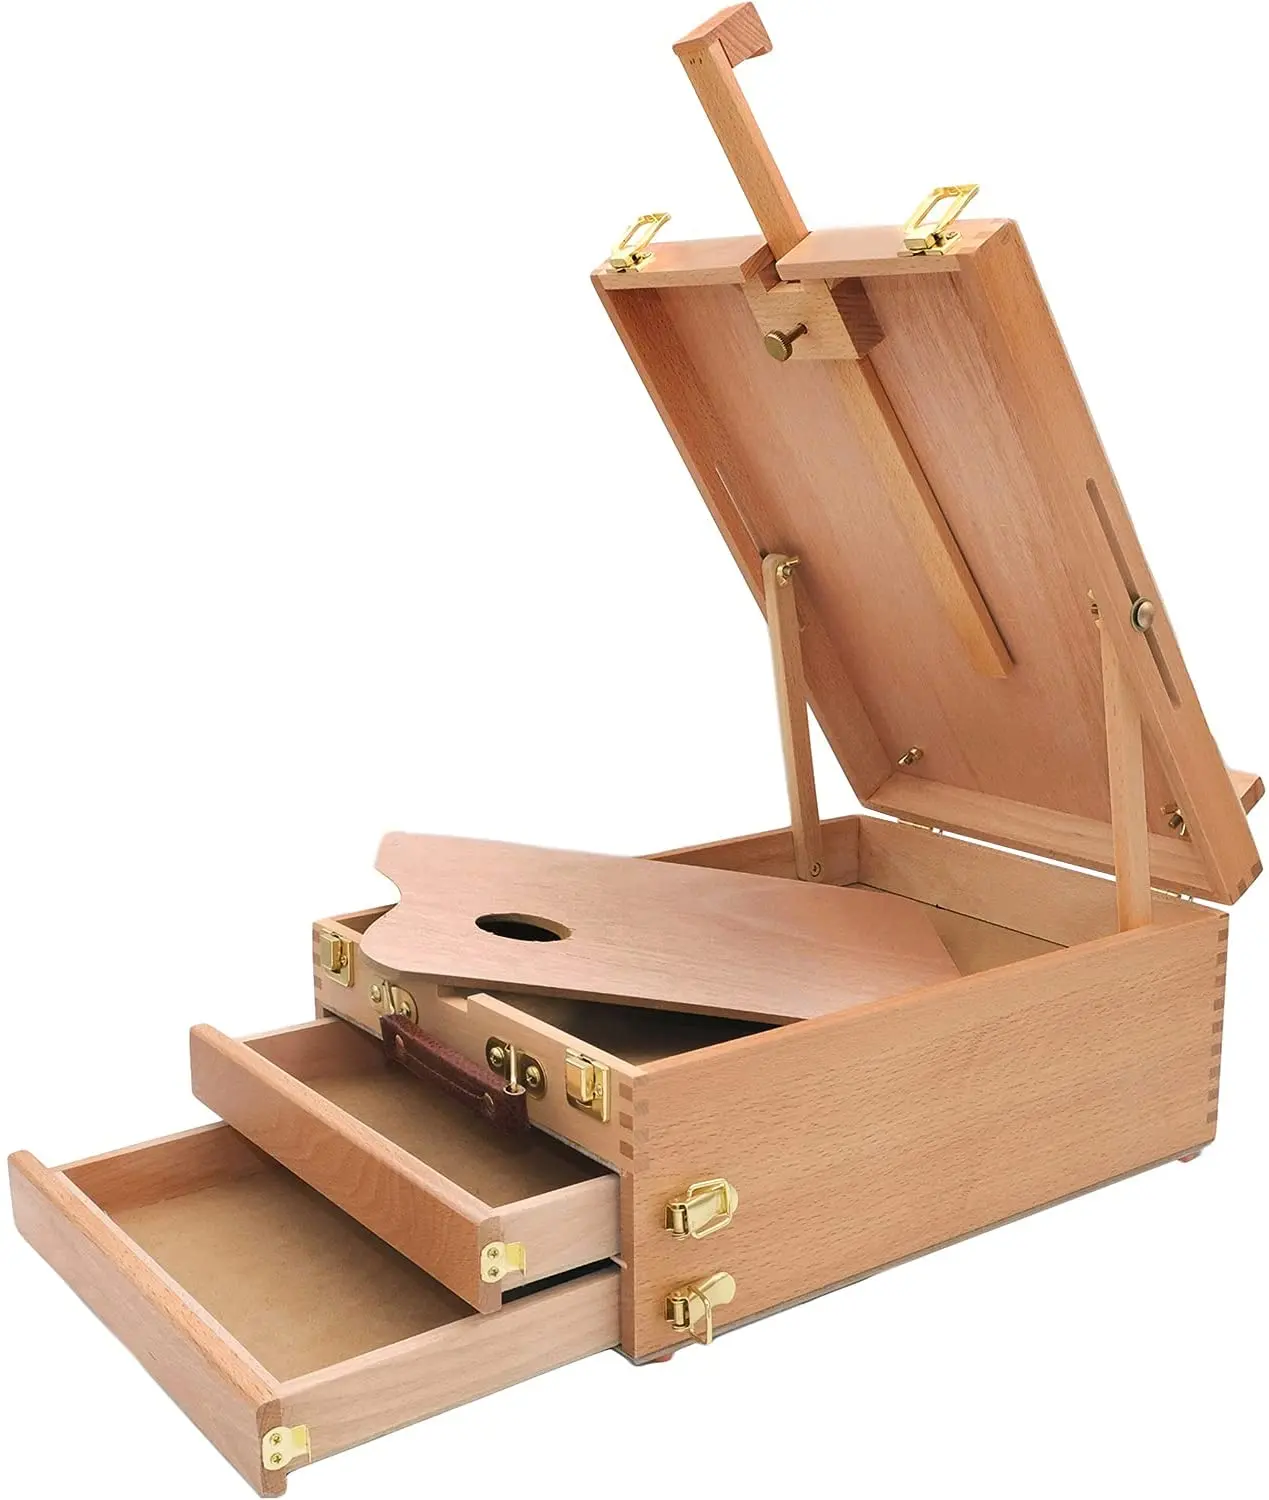 MEEDEN Artist Tabletop Sketchbox Easel -Multi-Function Adjustable Beech Wood Sketch Box With 2-Drawers And 1-Paint Palette